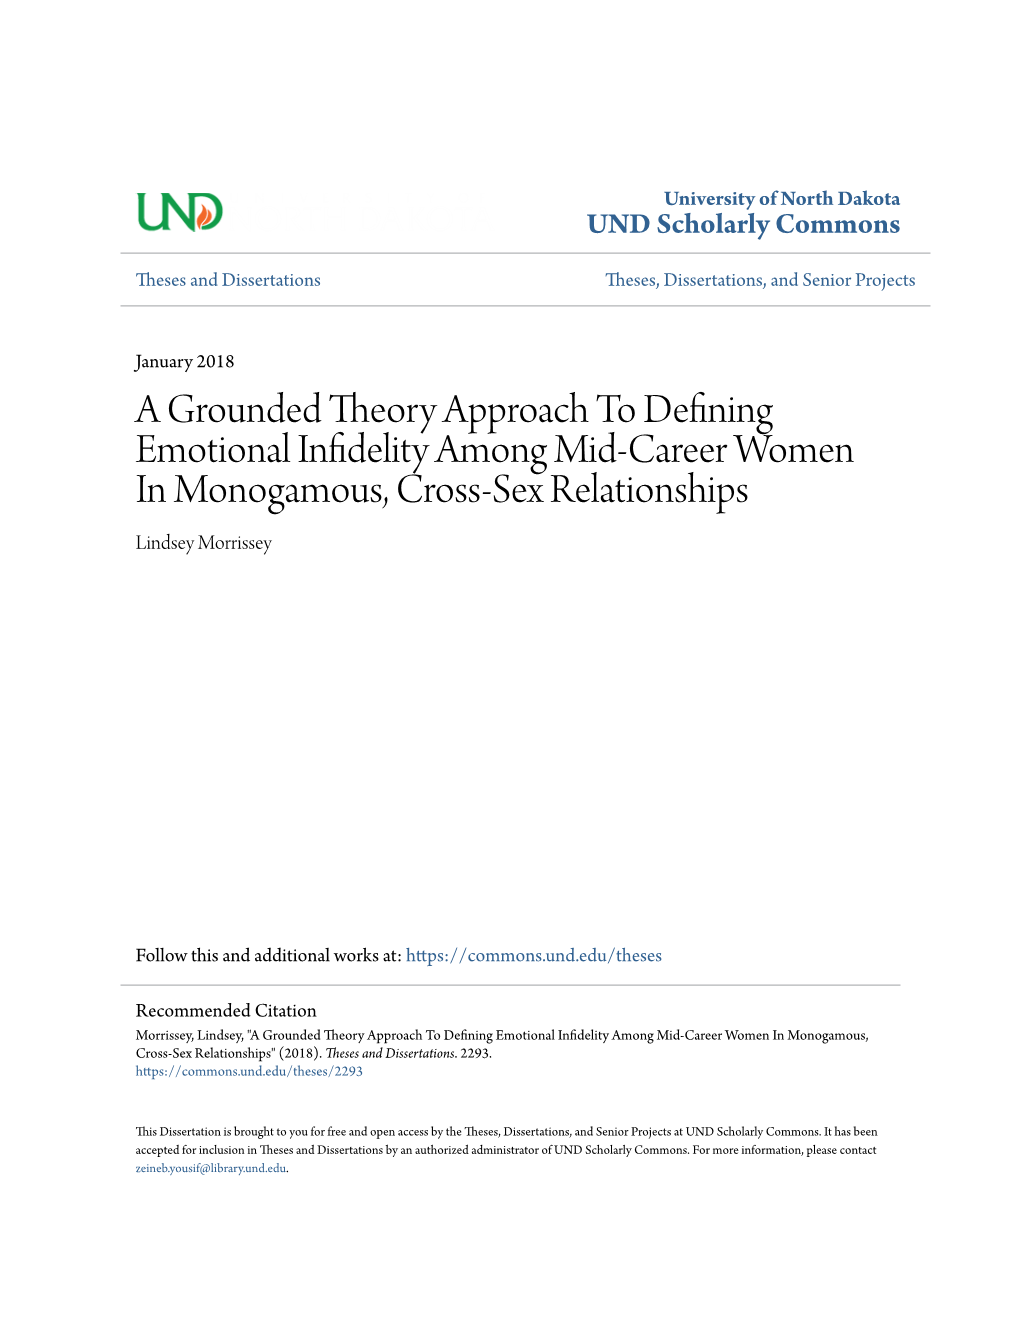 A Grounded Theory Approach to Defining Emotional Infidelity Among Mid-Career Women in Monogamous, Cross-Sex Relationships Lindsey Morrissey